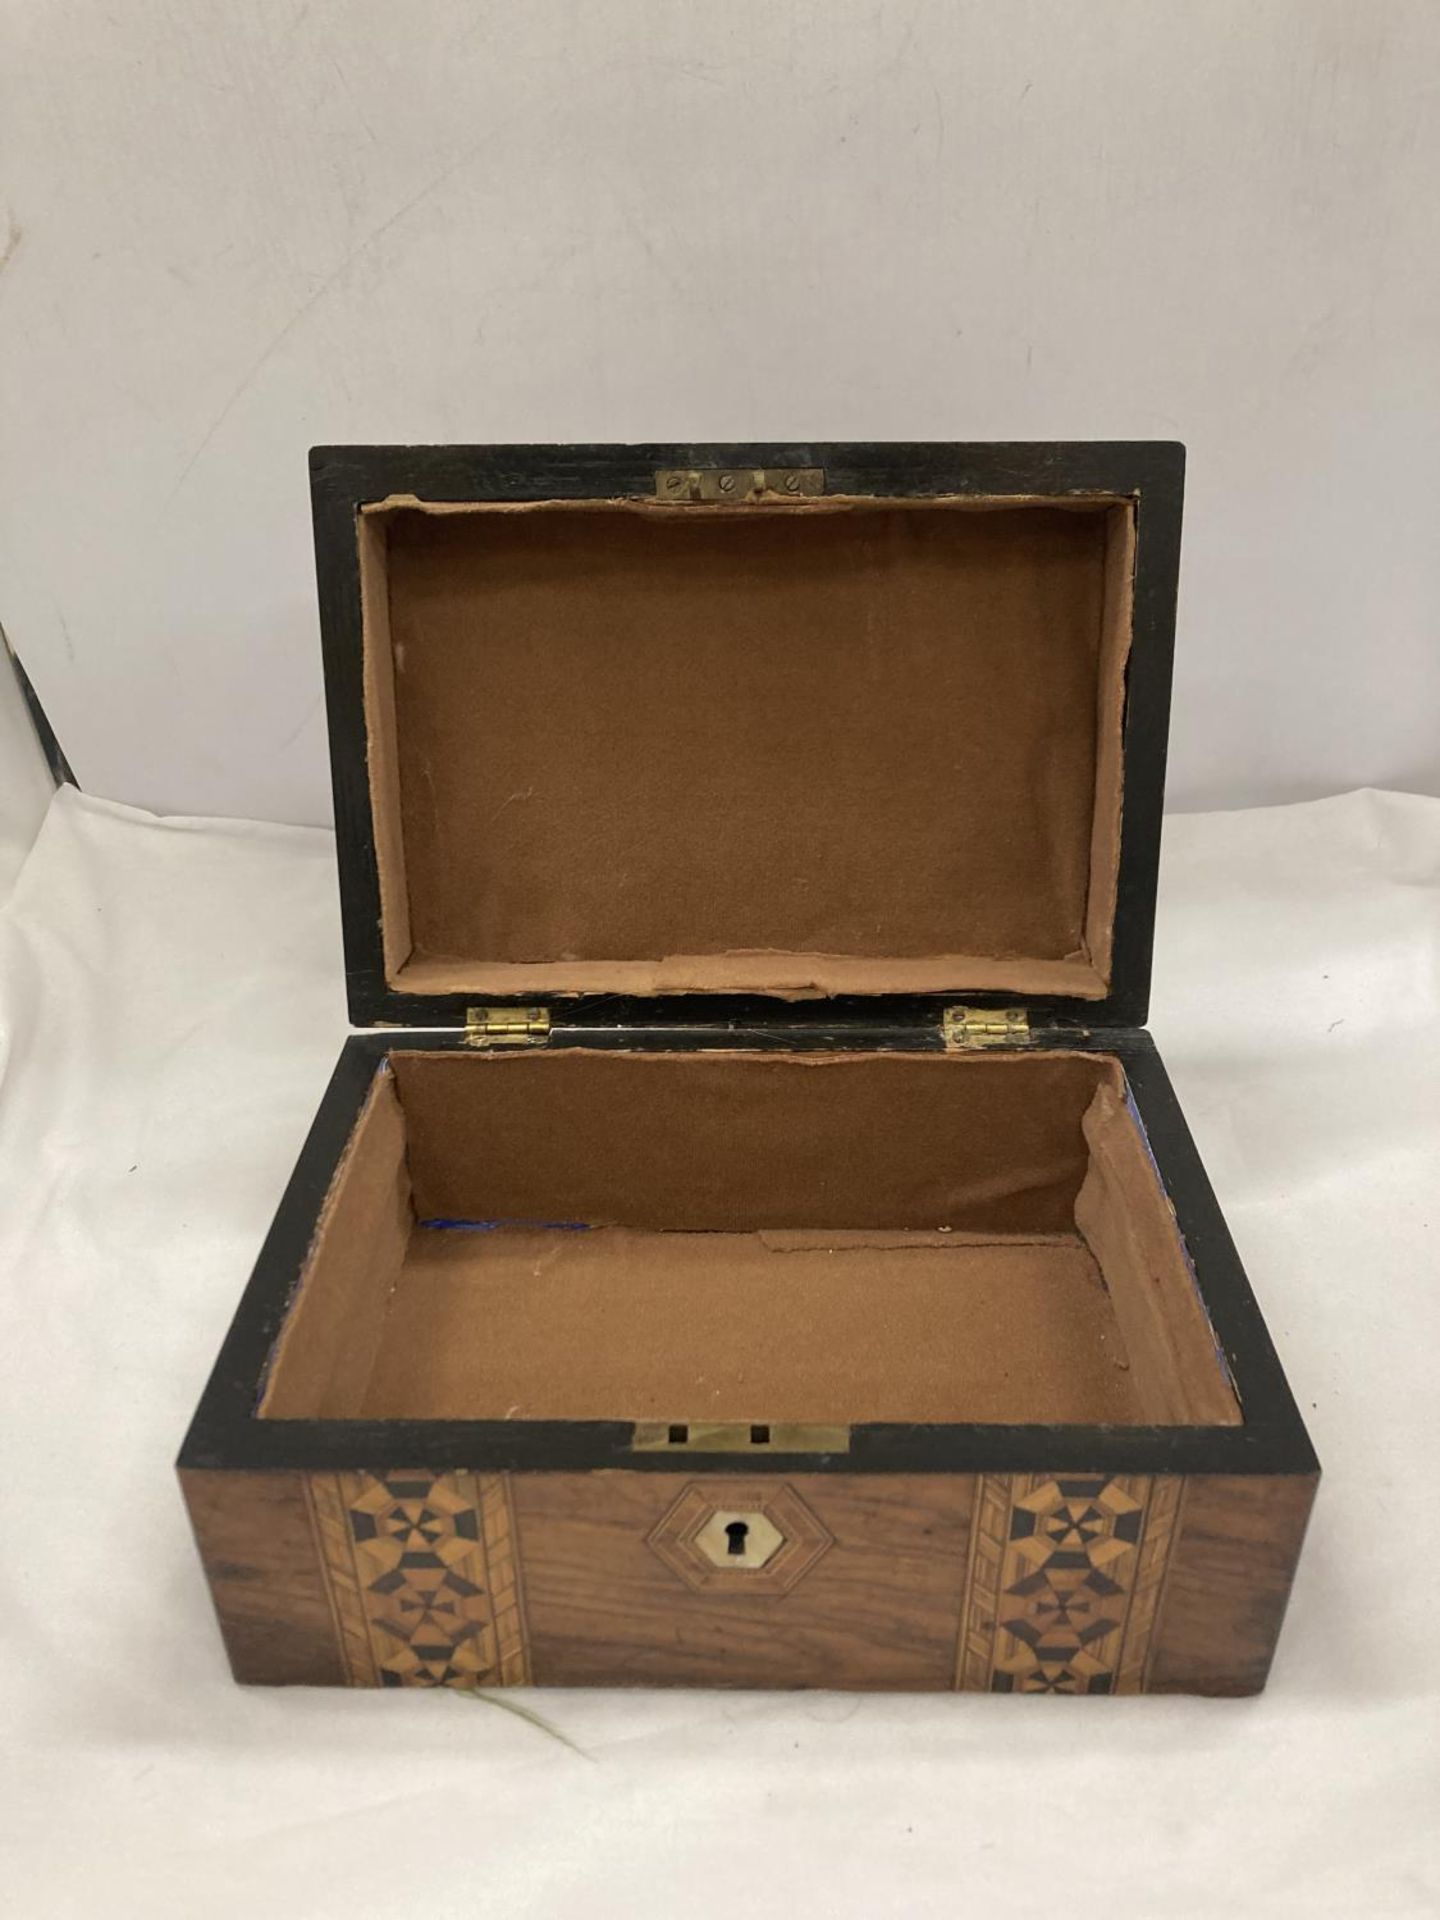 AN EARLY VICTORIAN ROSEWOOD ULTITY BOX WITH MARQUETRY AND NACRE 10" X 7" X 5" - Image 3 of 3